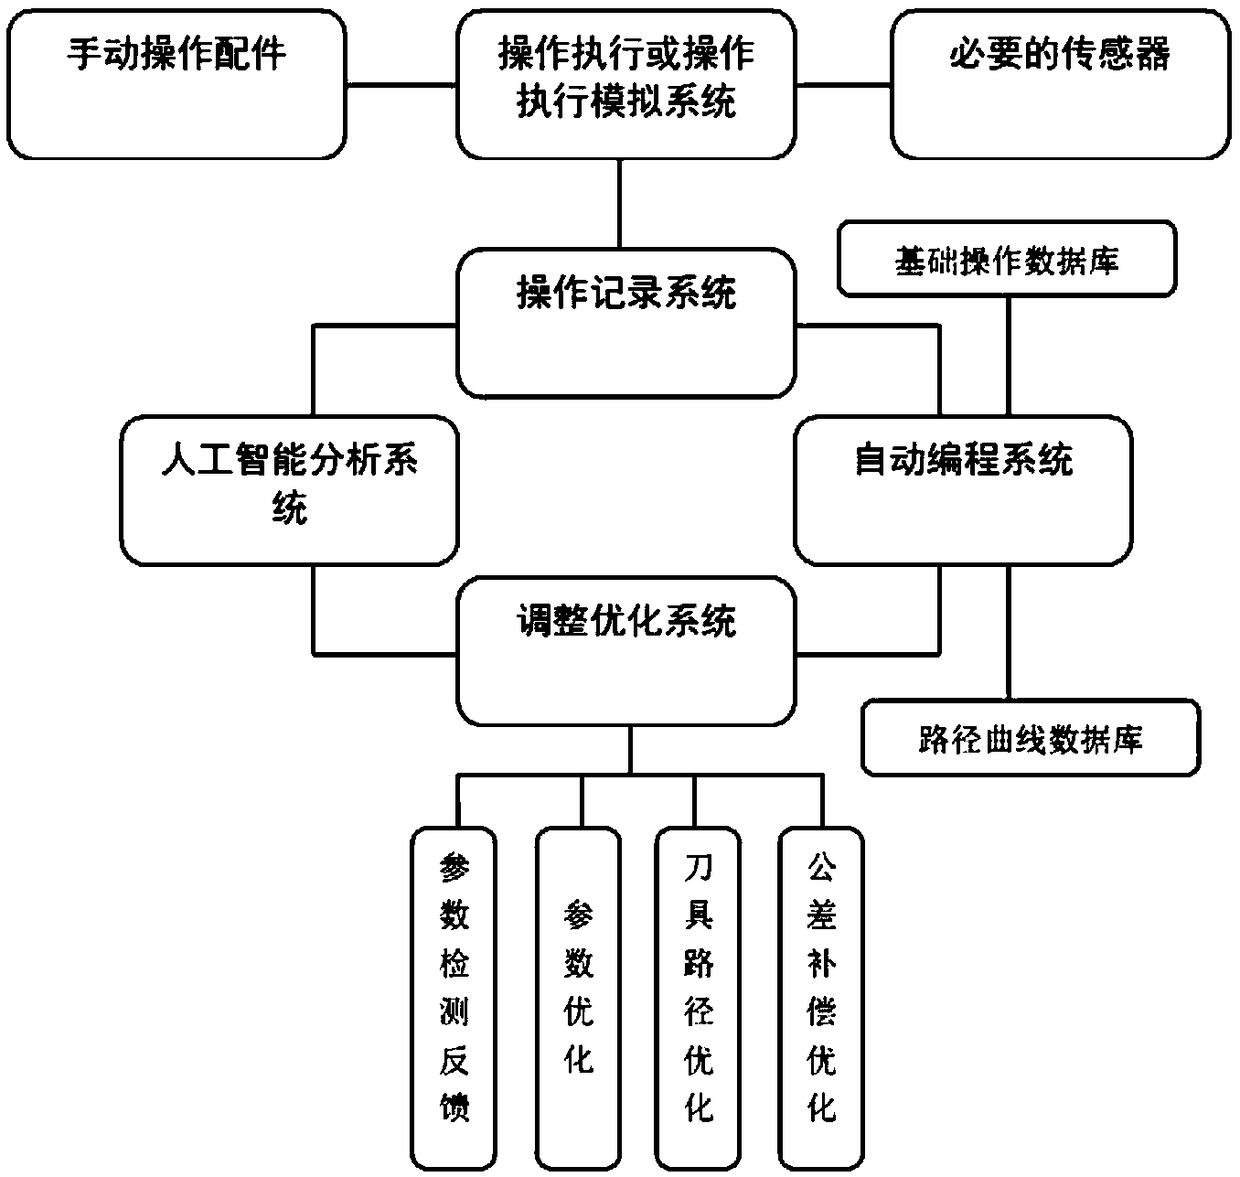 Auxiliary Programming Method for Execution Program of NC Machining Equipment